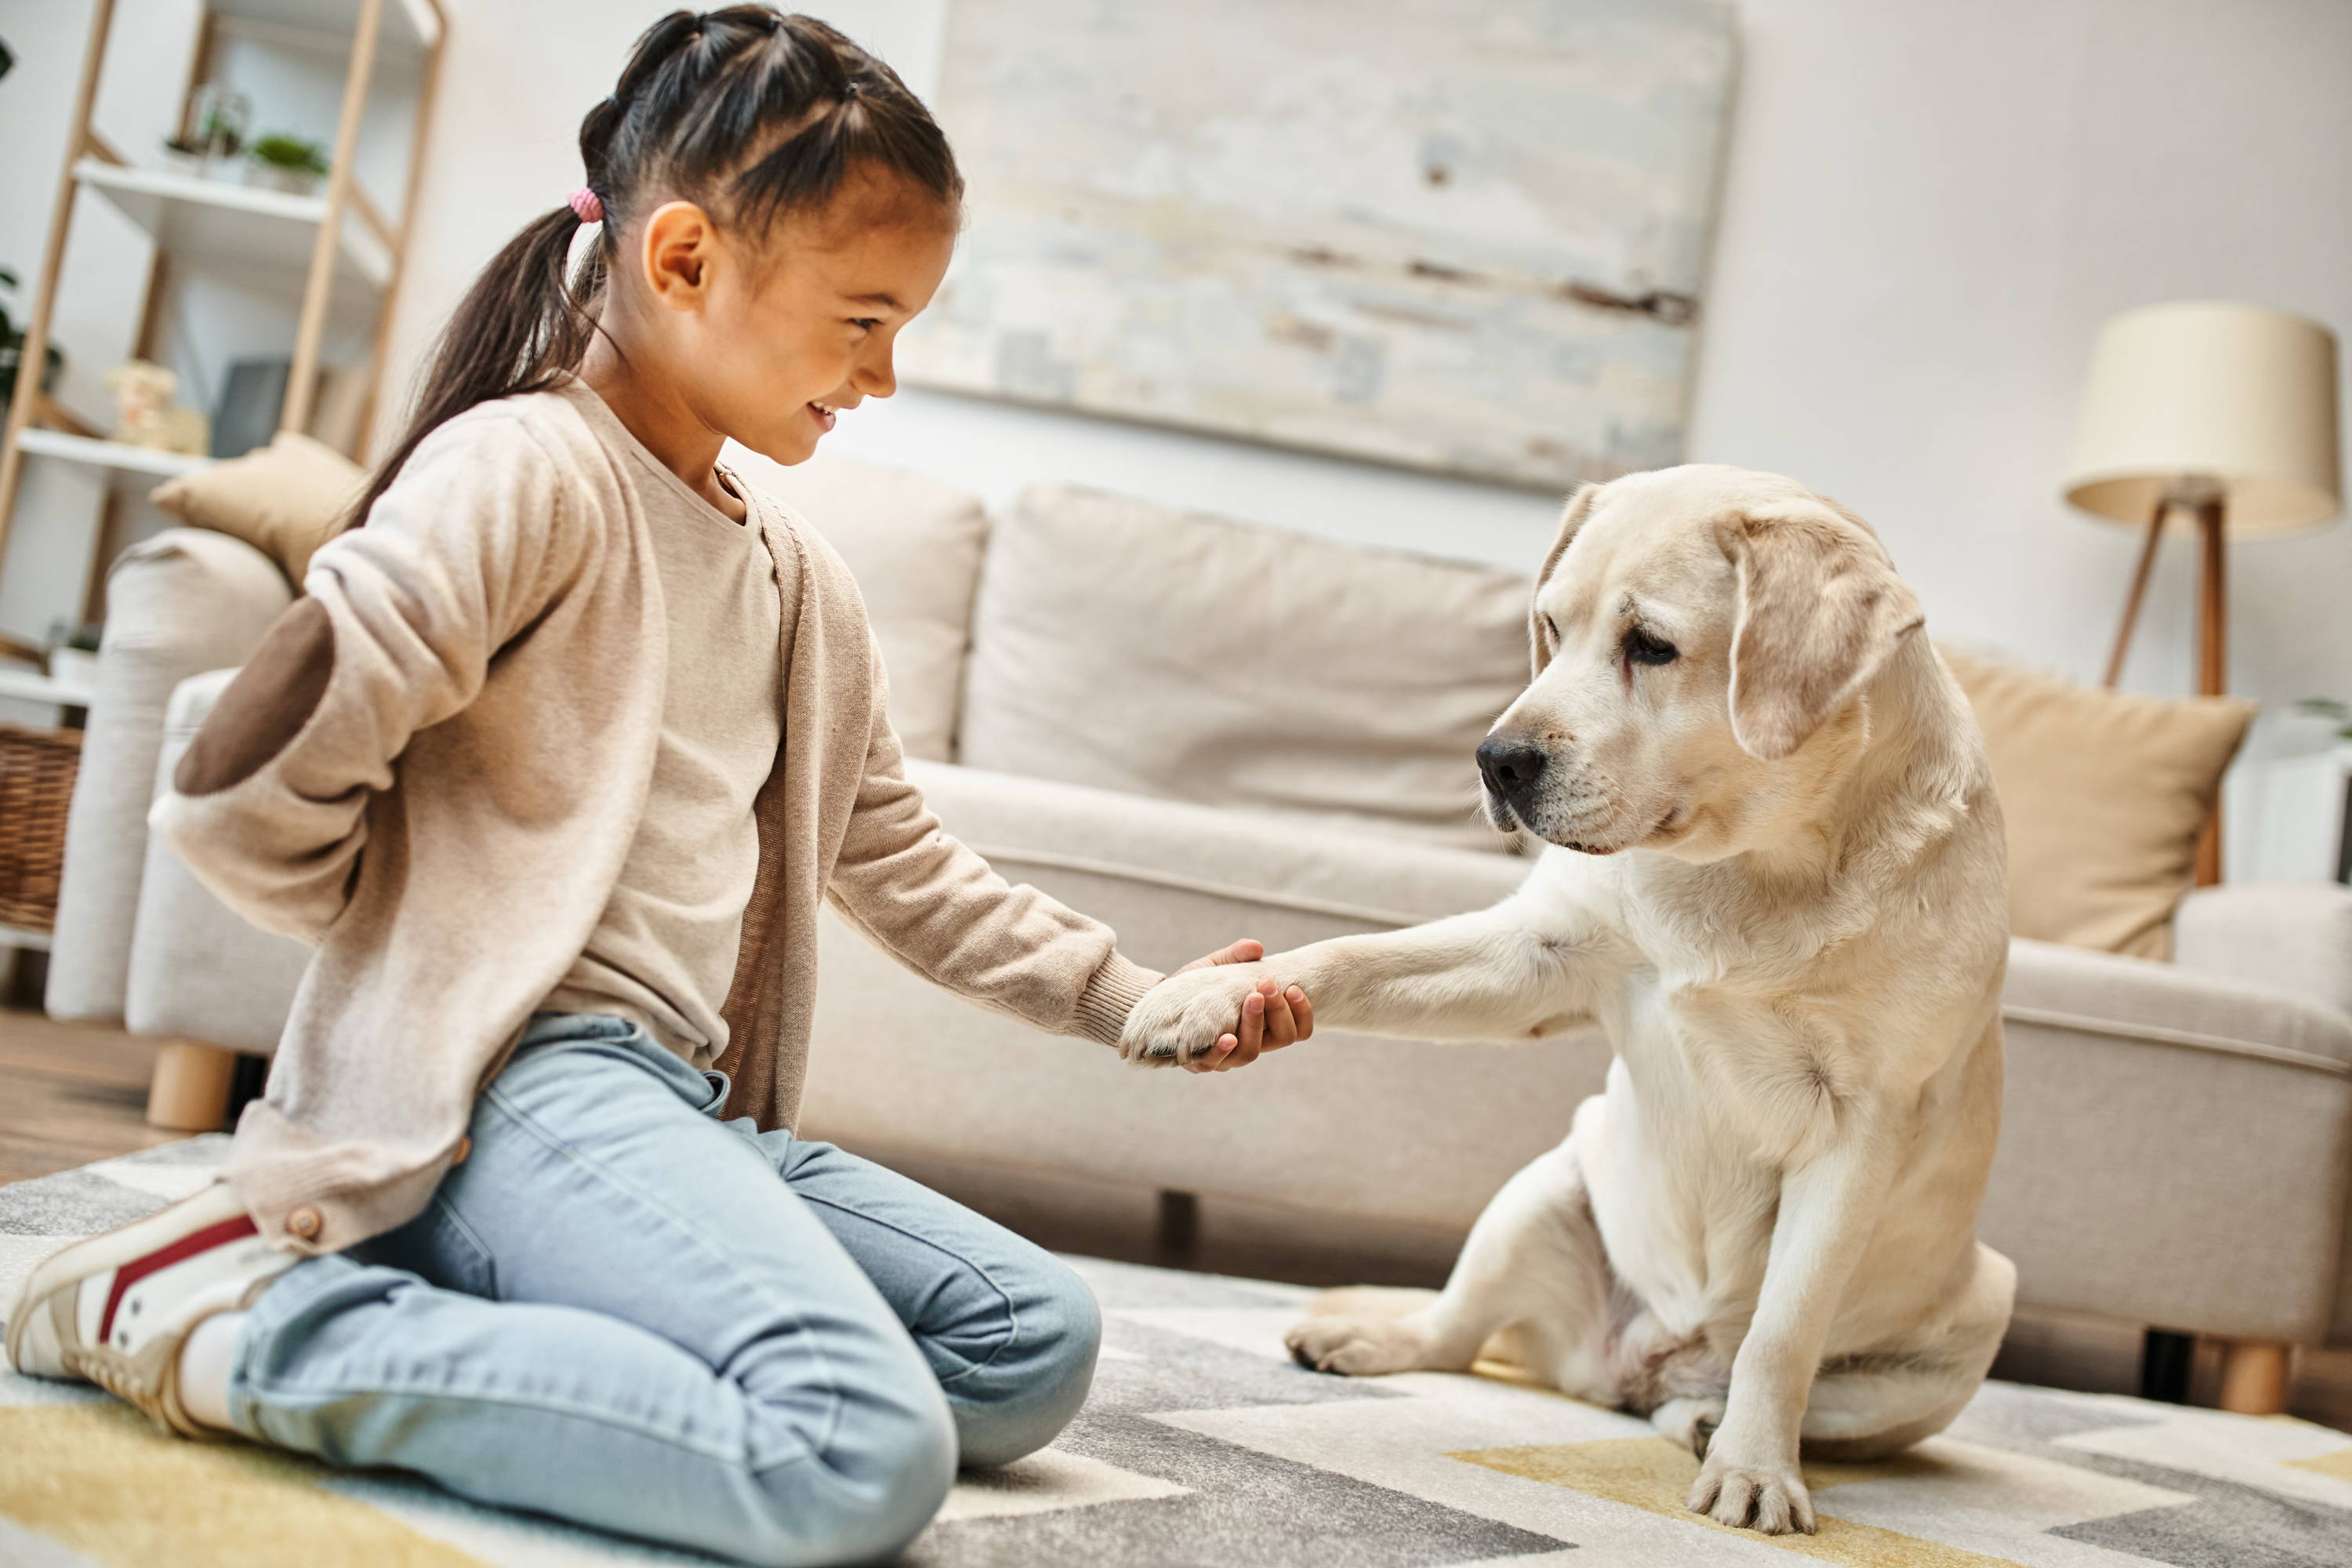 Child playing with dog in living room